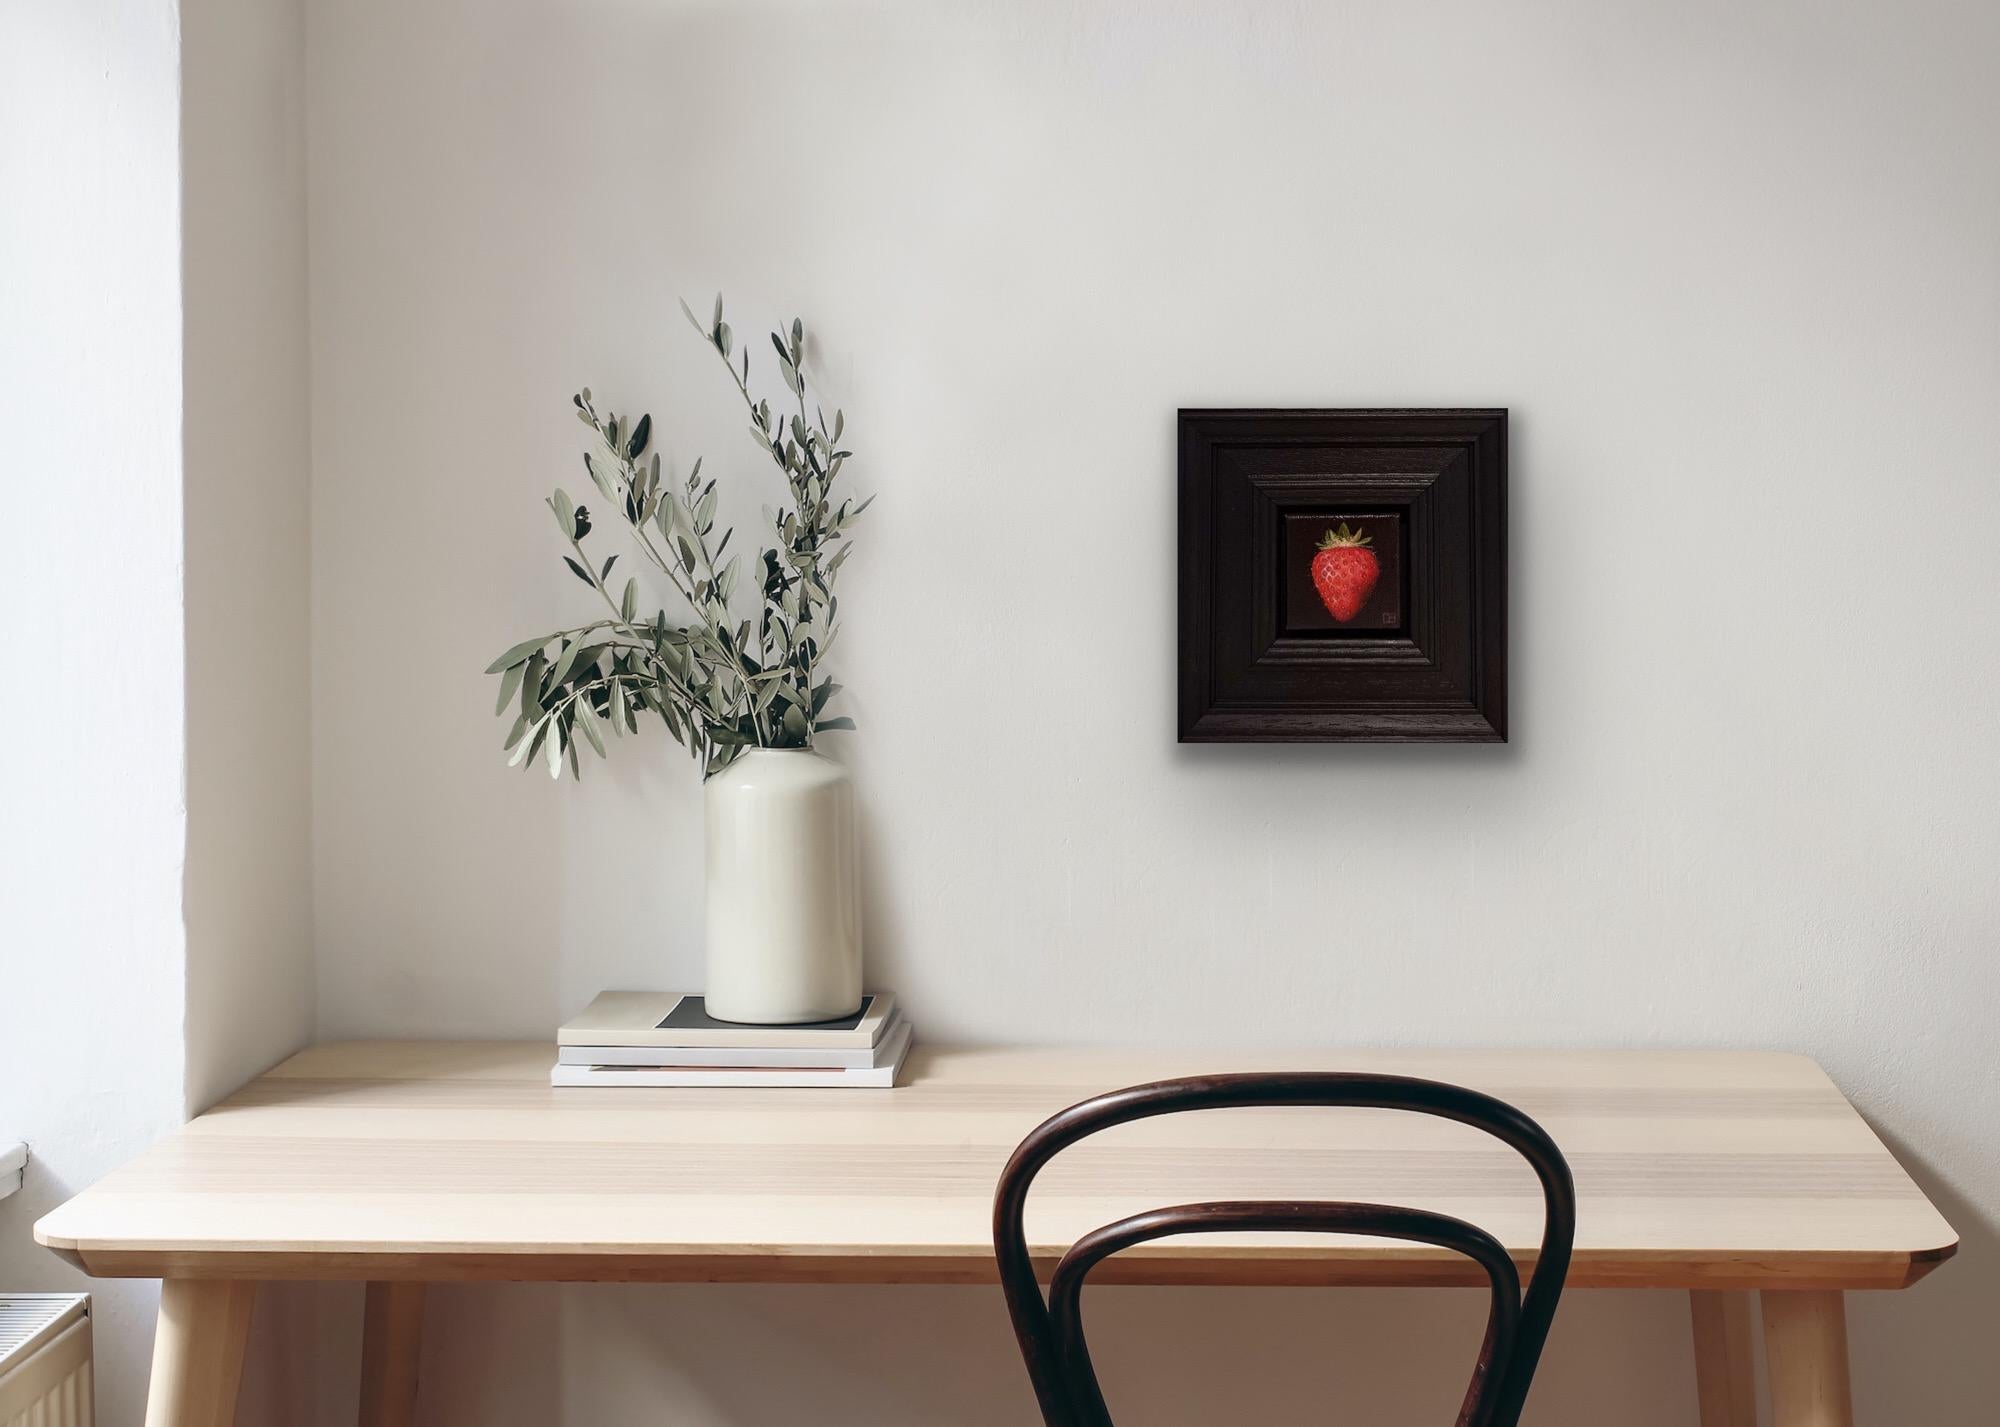 Pocket Red Strawberry is an original oil painting by Dani Humberstone as part of her Pocket Painting series featuring small scale realistic oil paintings, with a nod to baroque still life painting. The paitings are set in a black wood layered